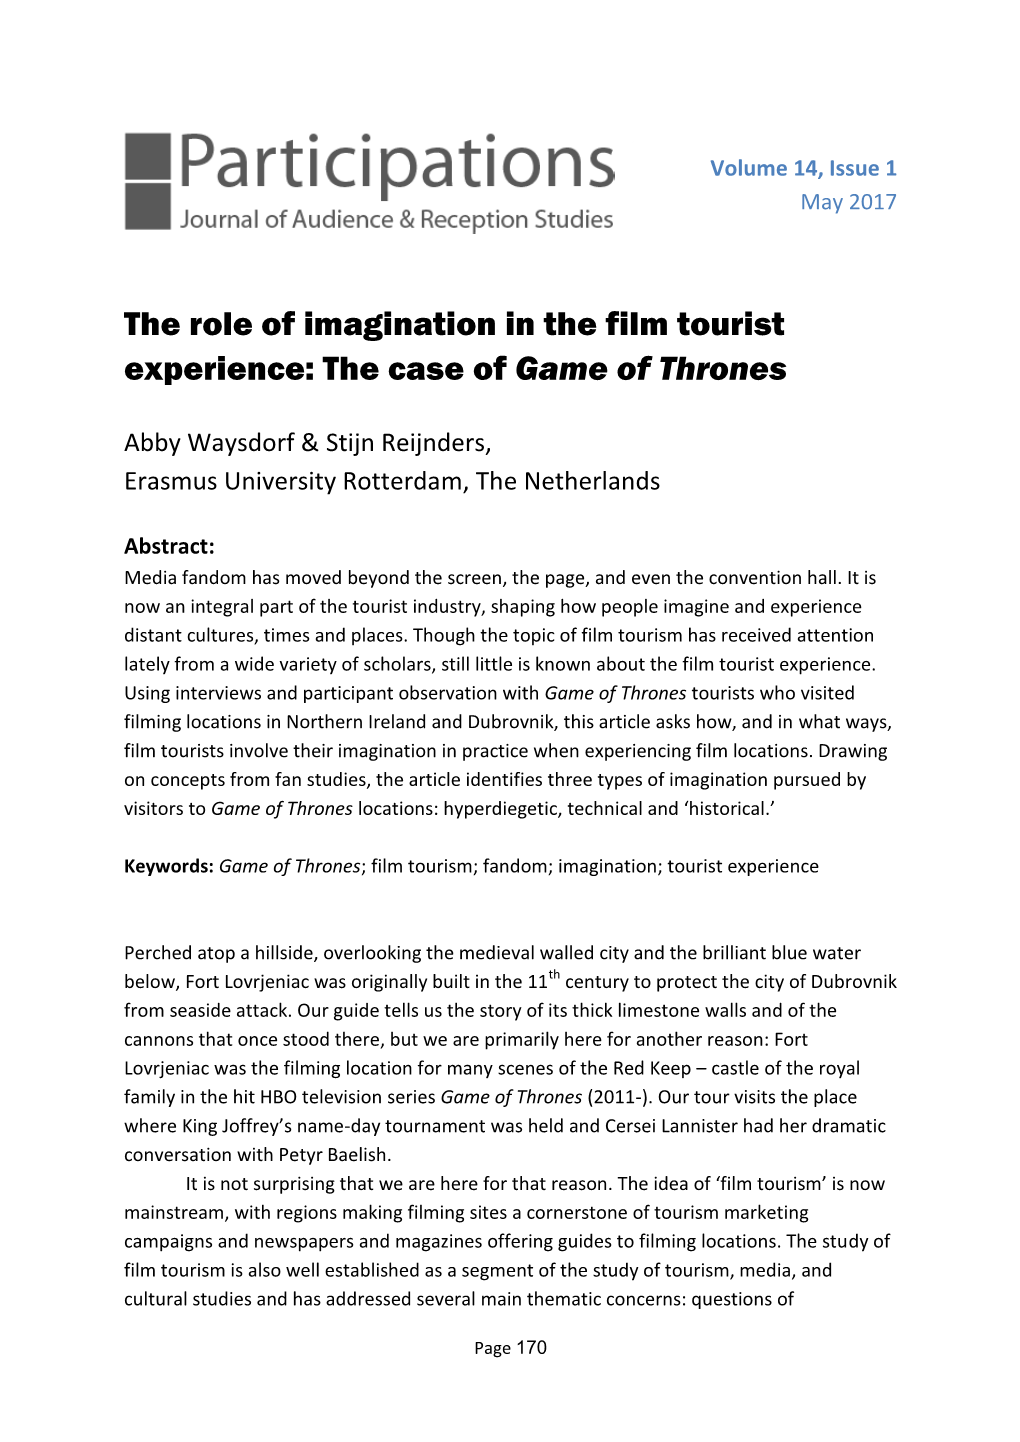 The Role of Imagination in the Film Tourist Experience: the Case of Game of Thrones